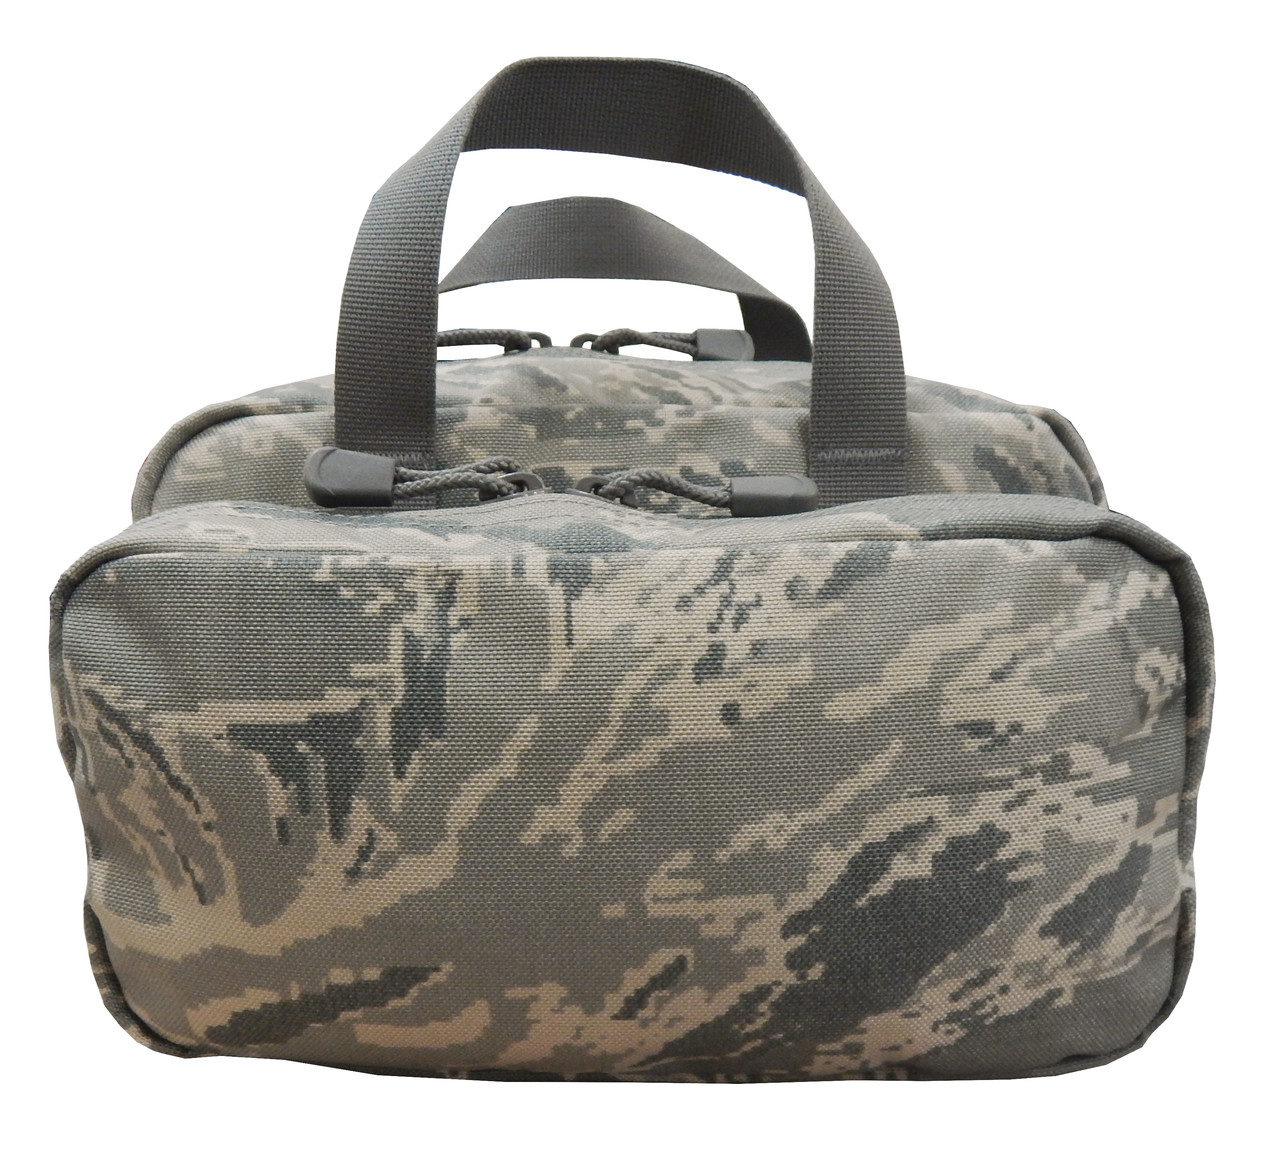 ABU All Purpose Bag by Spec Ops | Military Luggage